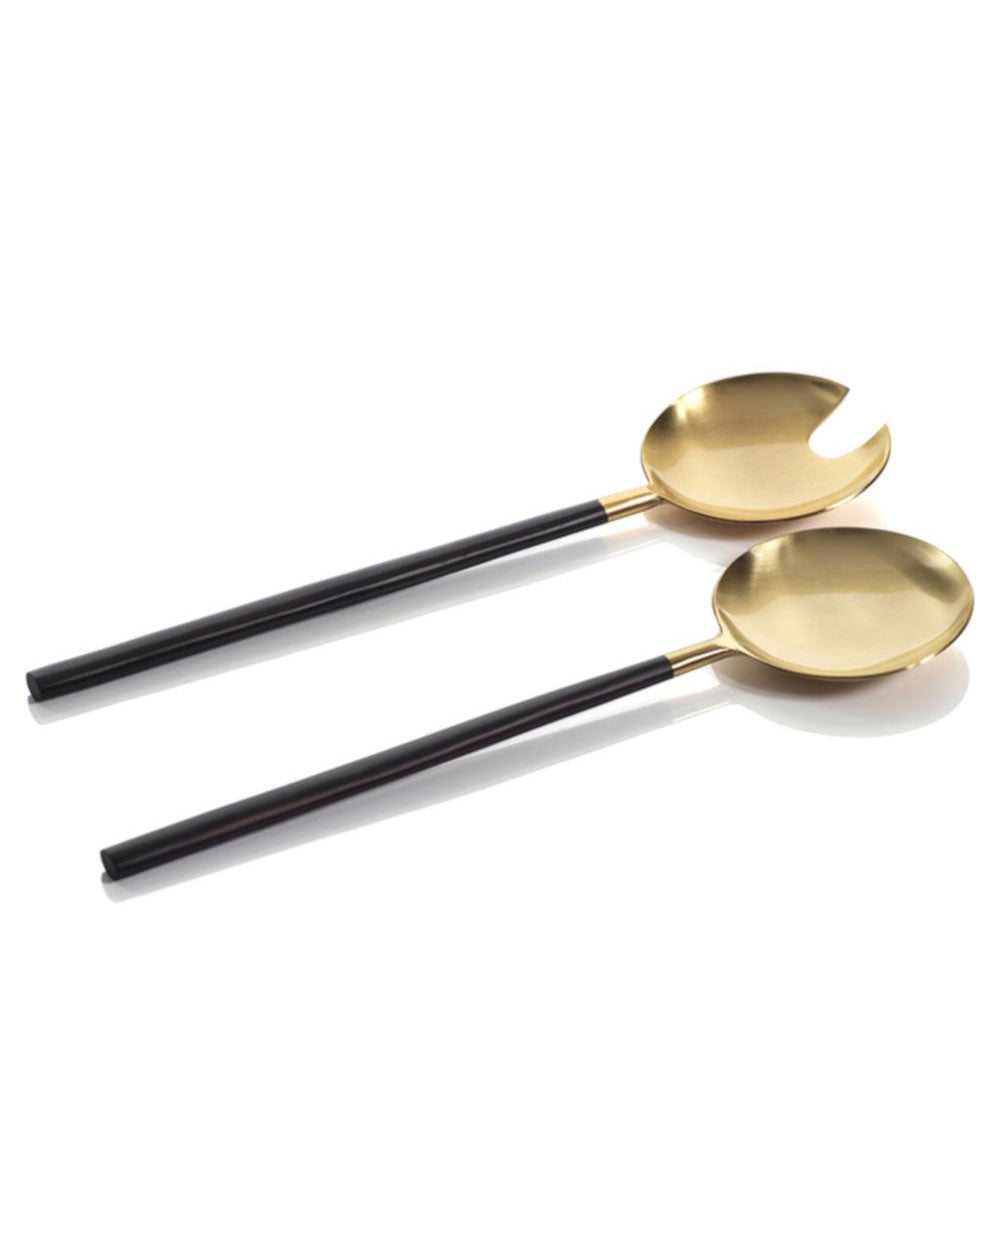 Maxfield Server Set in Black and Matte Gold